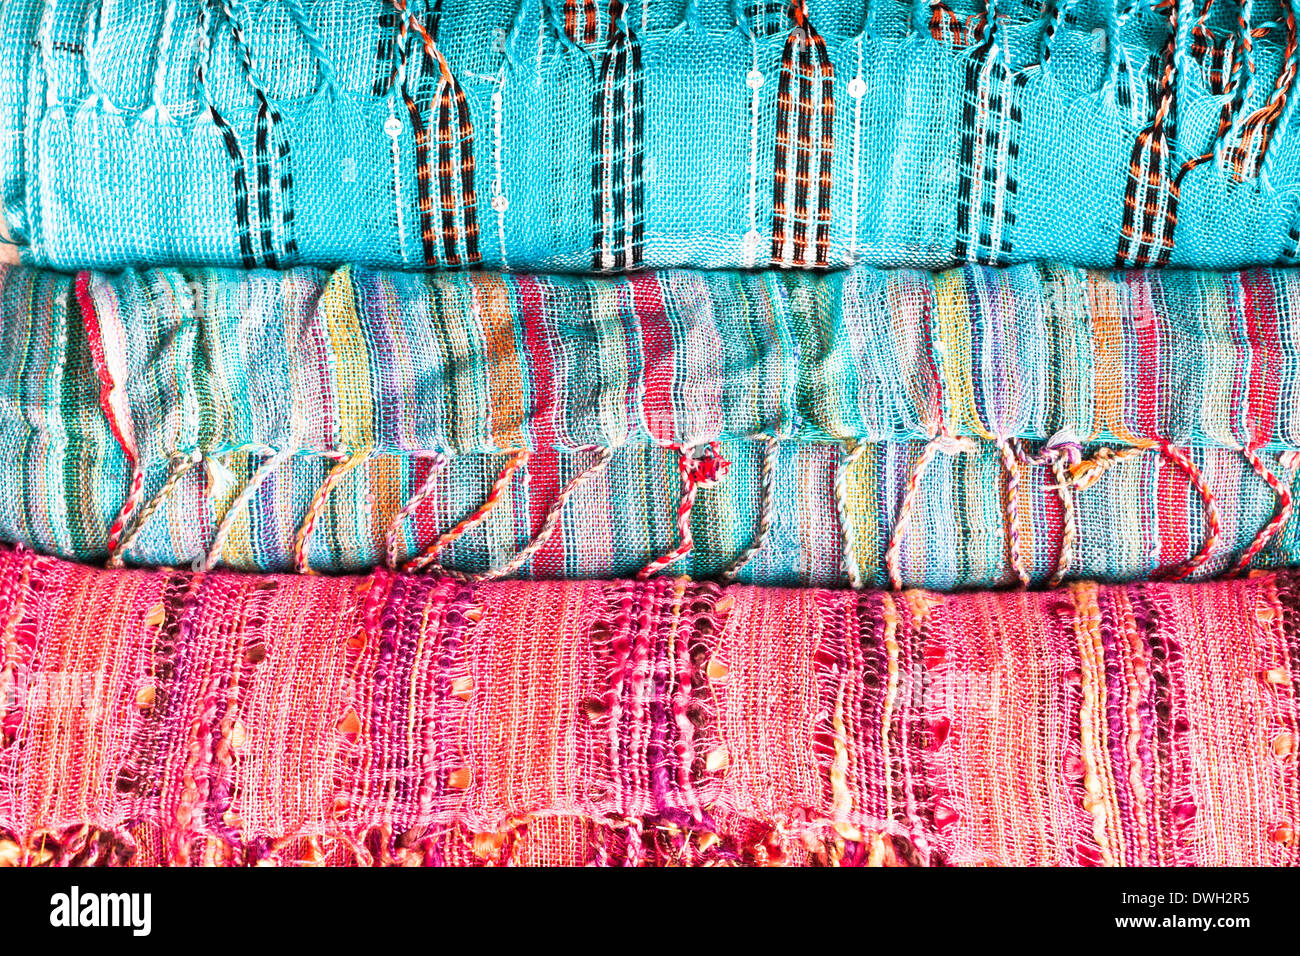 Rolled up colorful ladies scarves as a background Stock Photo